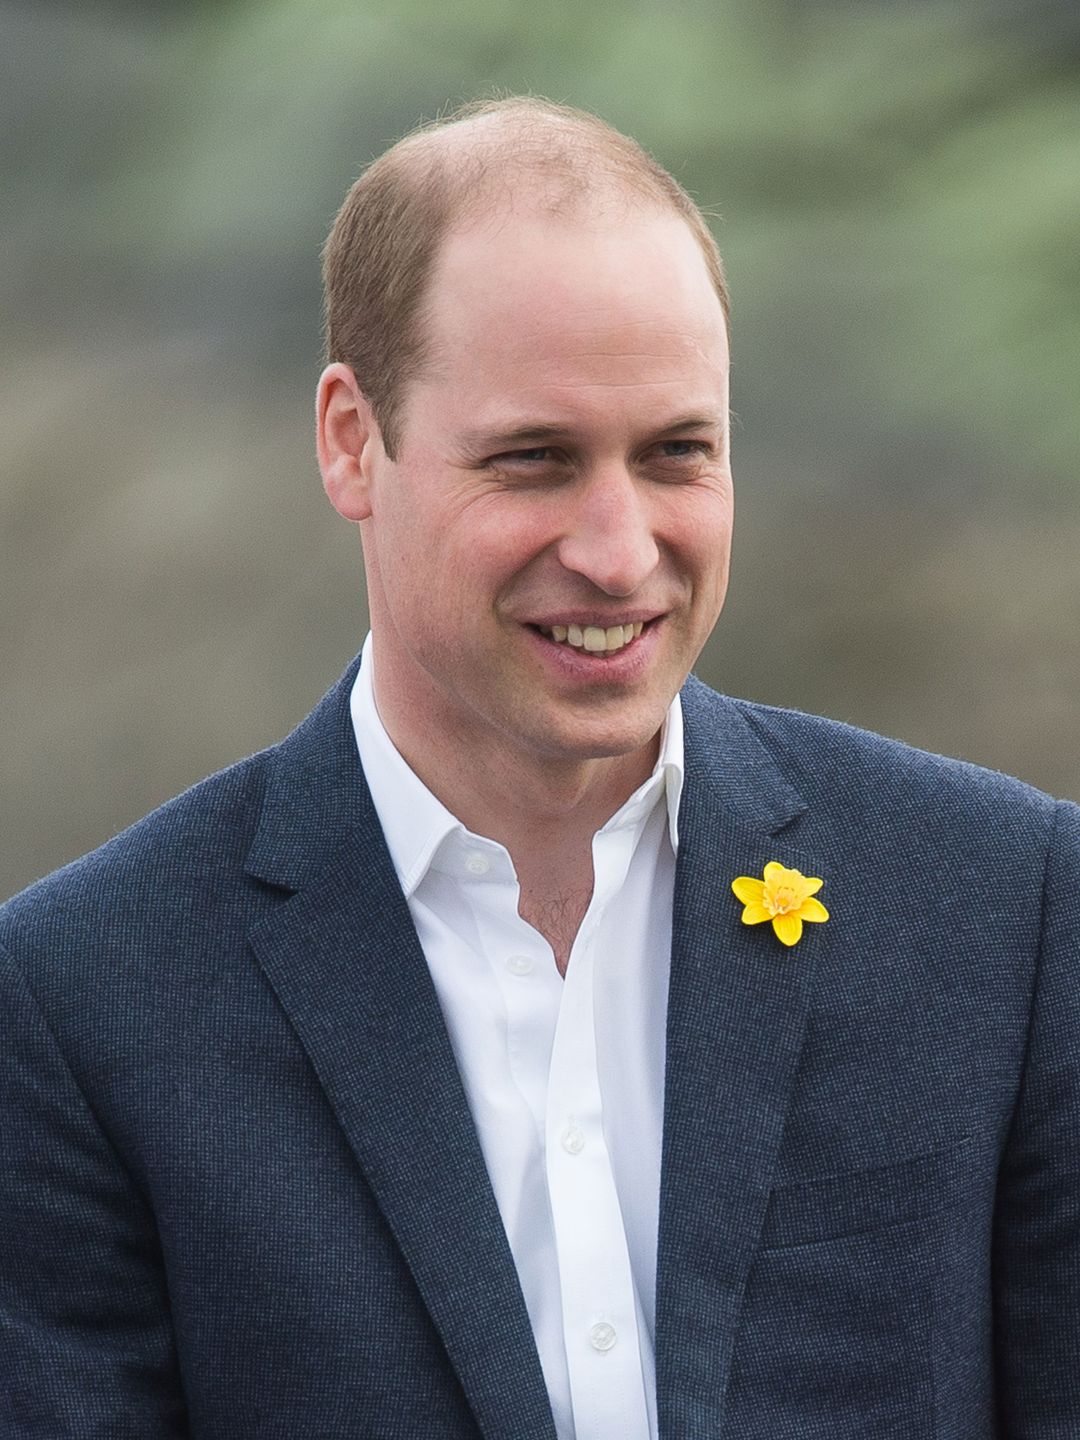 Prince William dating history